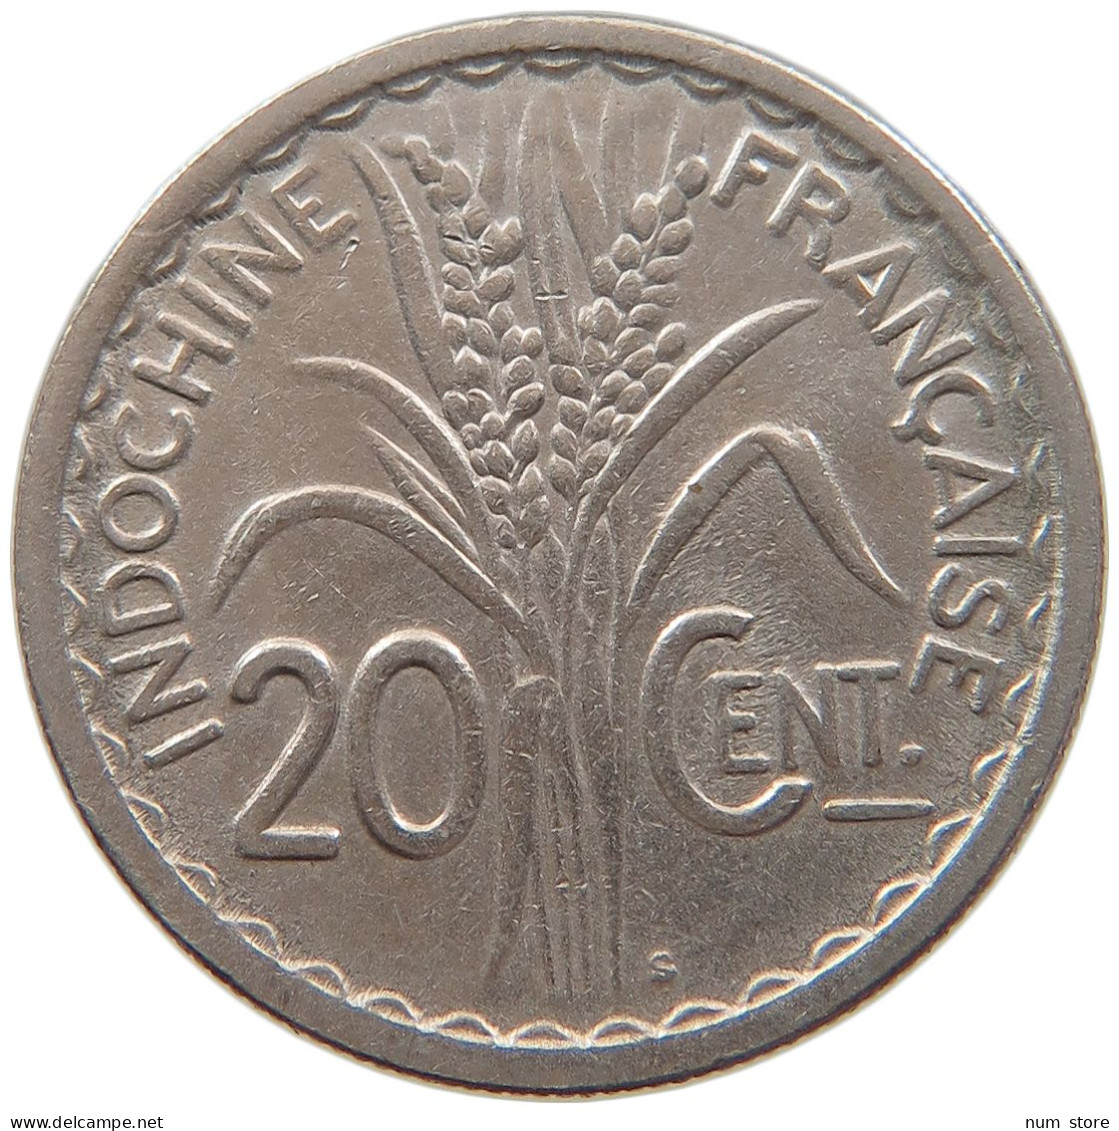 INDOCHINA 20 CENTS 1941 #s092 0349 - French Indochina